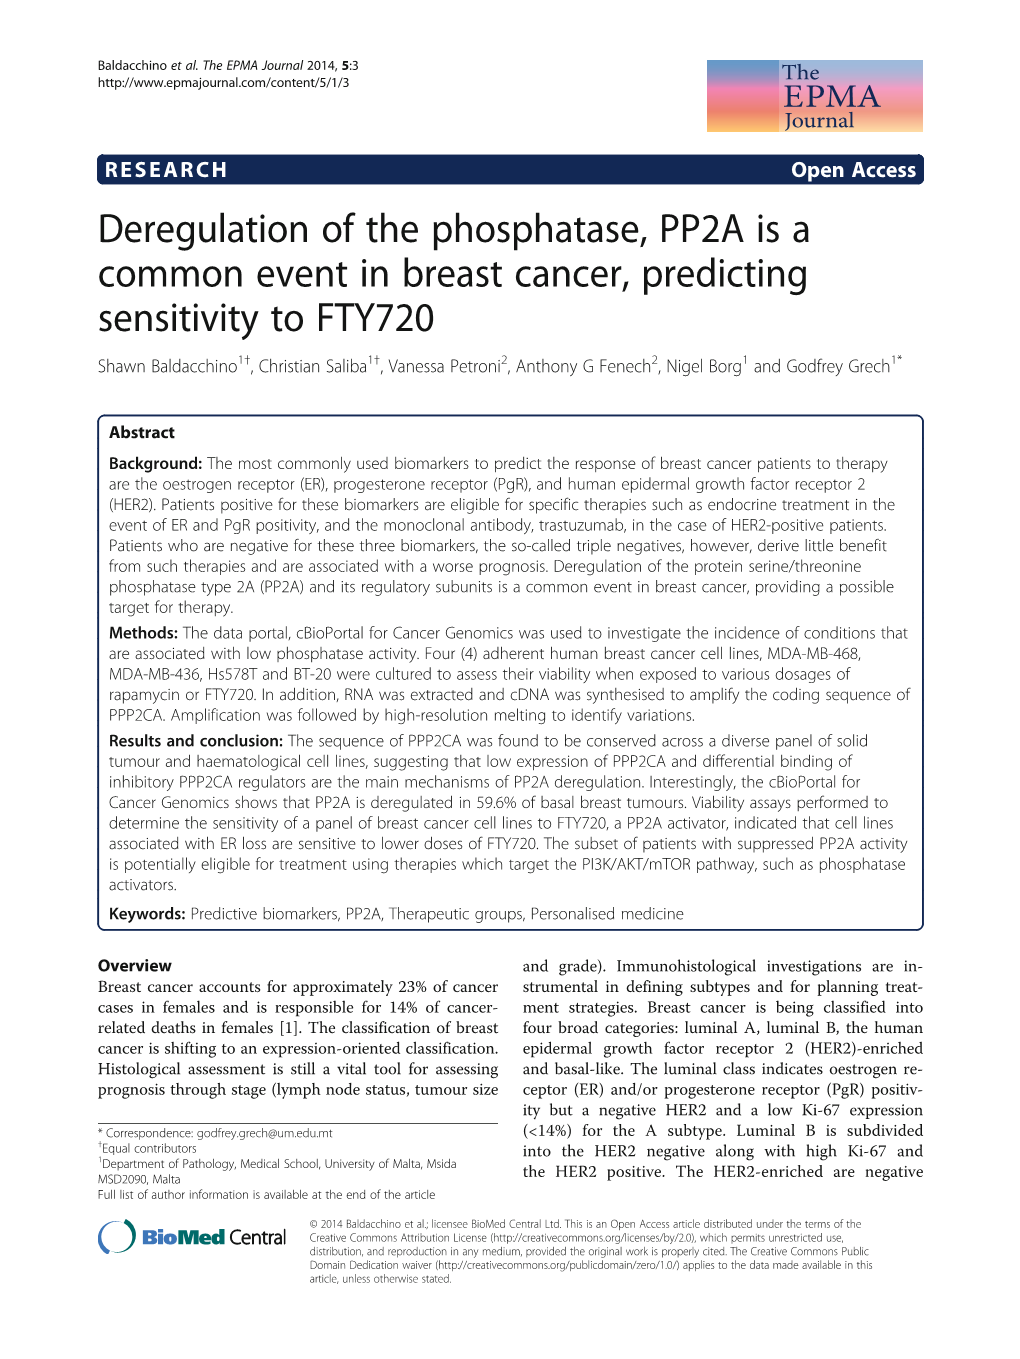 Deregulation of the Phosphatase, PP2A Is a Common Event in Breast